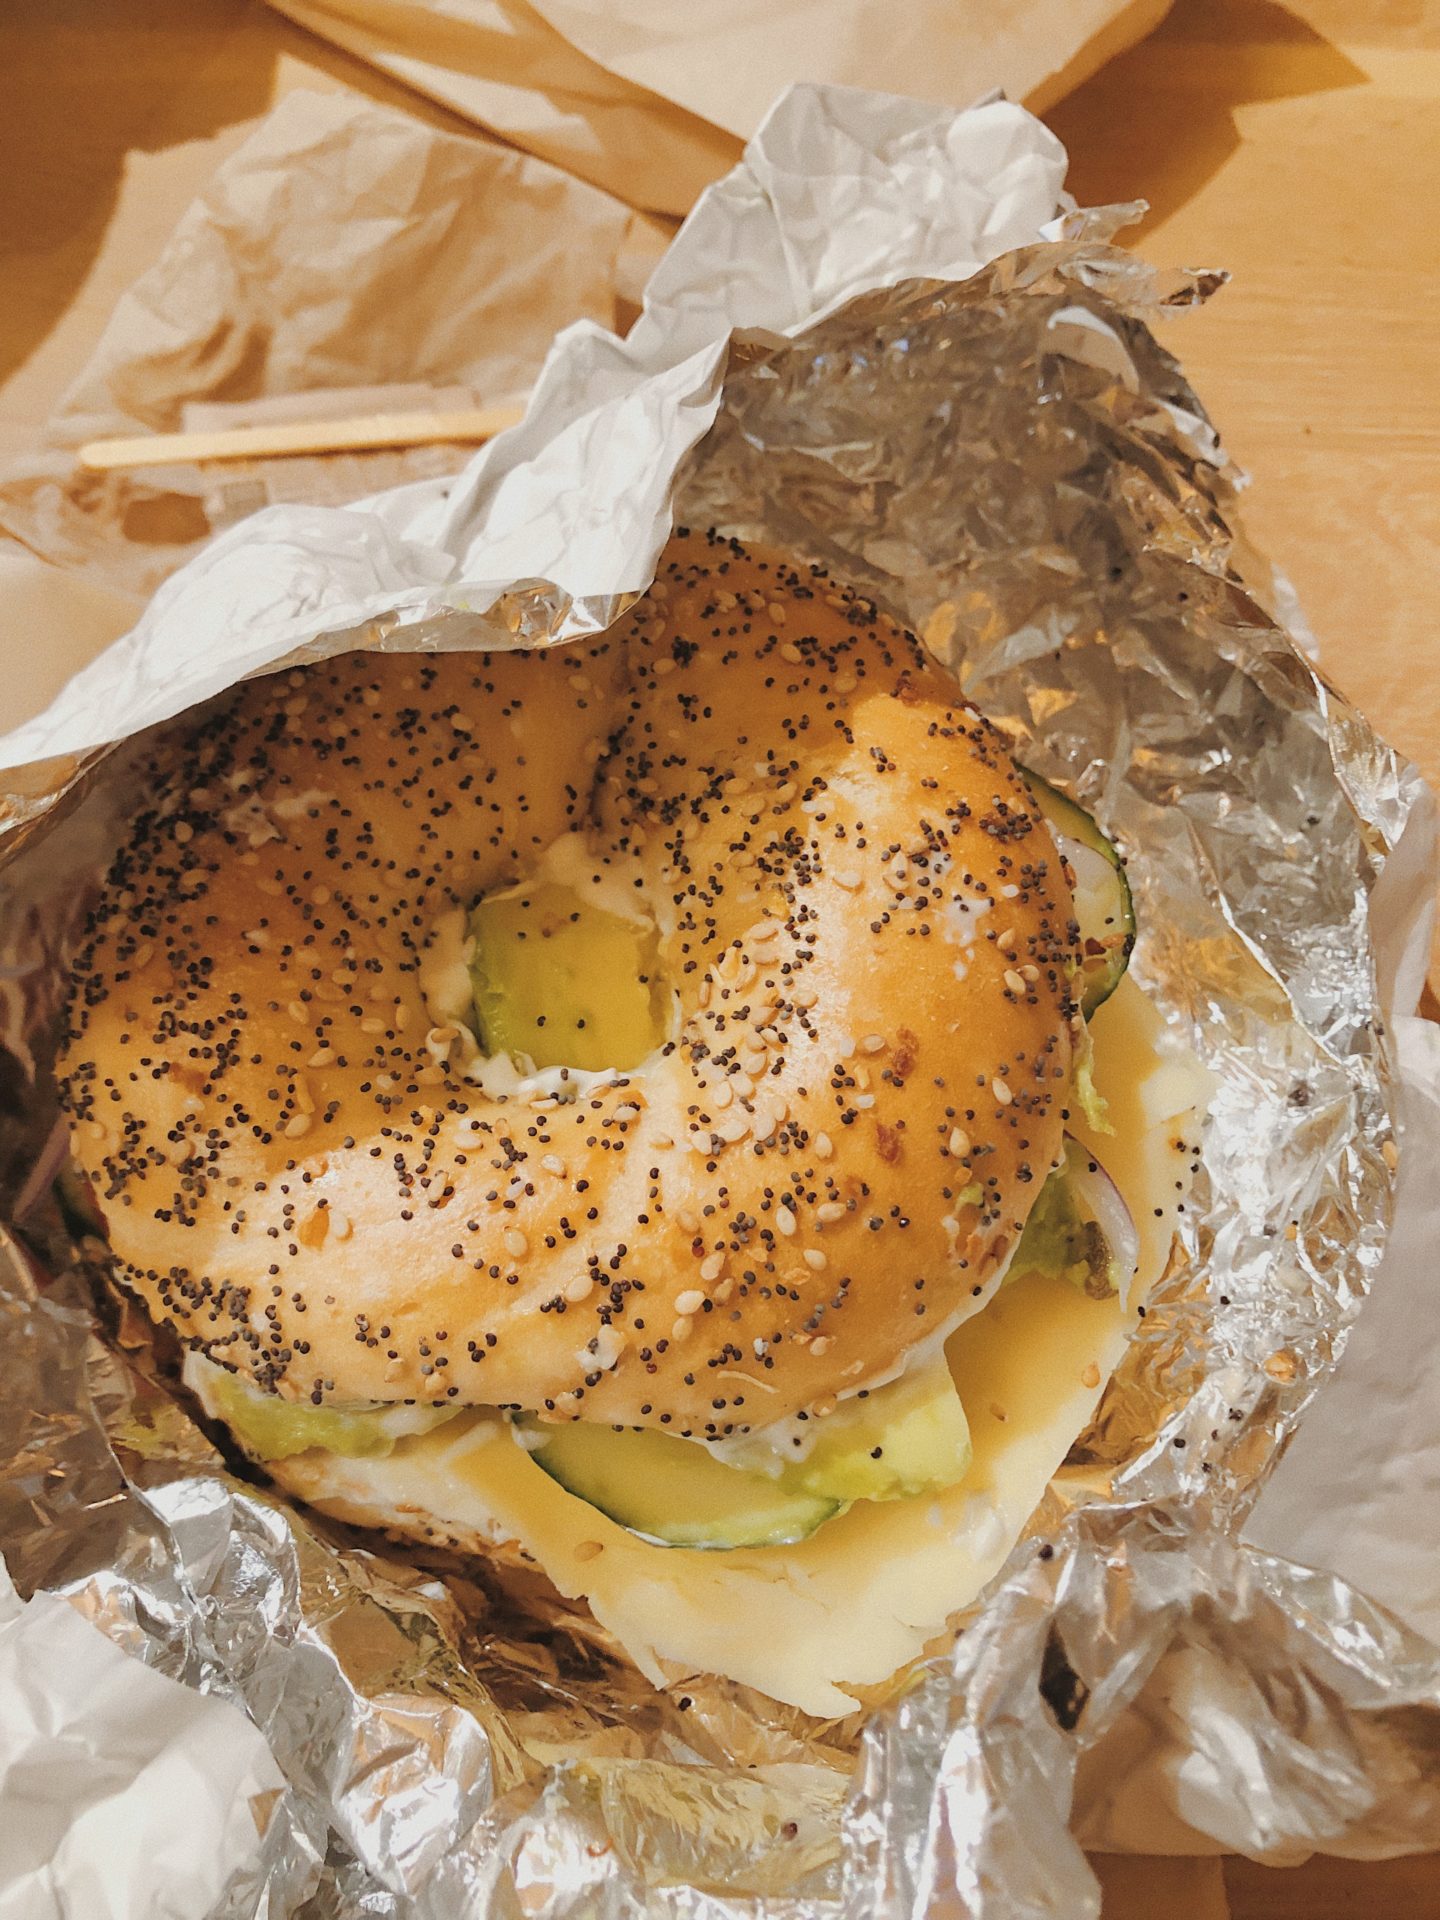 Trying a bagel in New York City